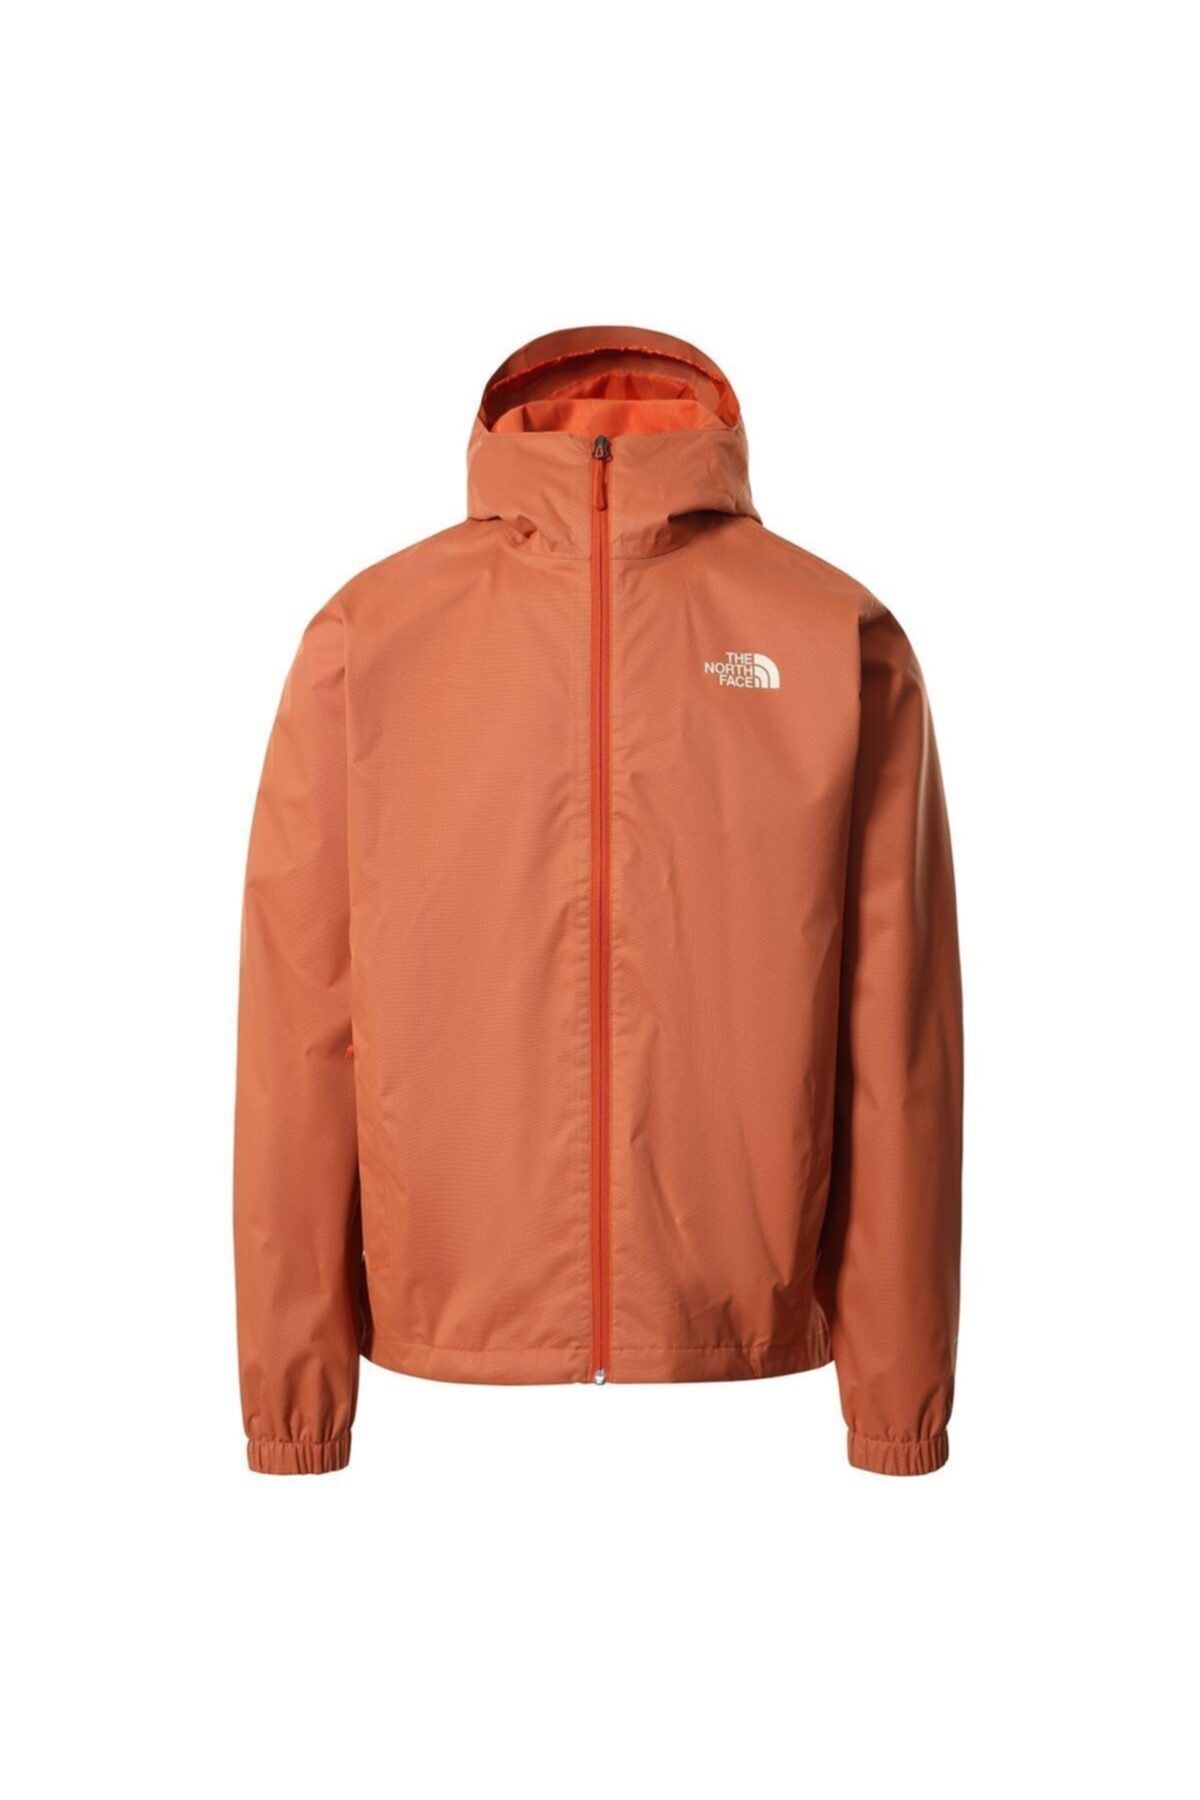 The North Face The Northface Erkek Quest Ceket Nf00a8azrw01